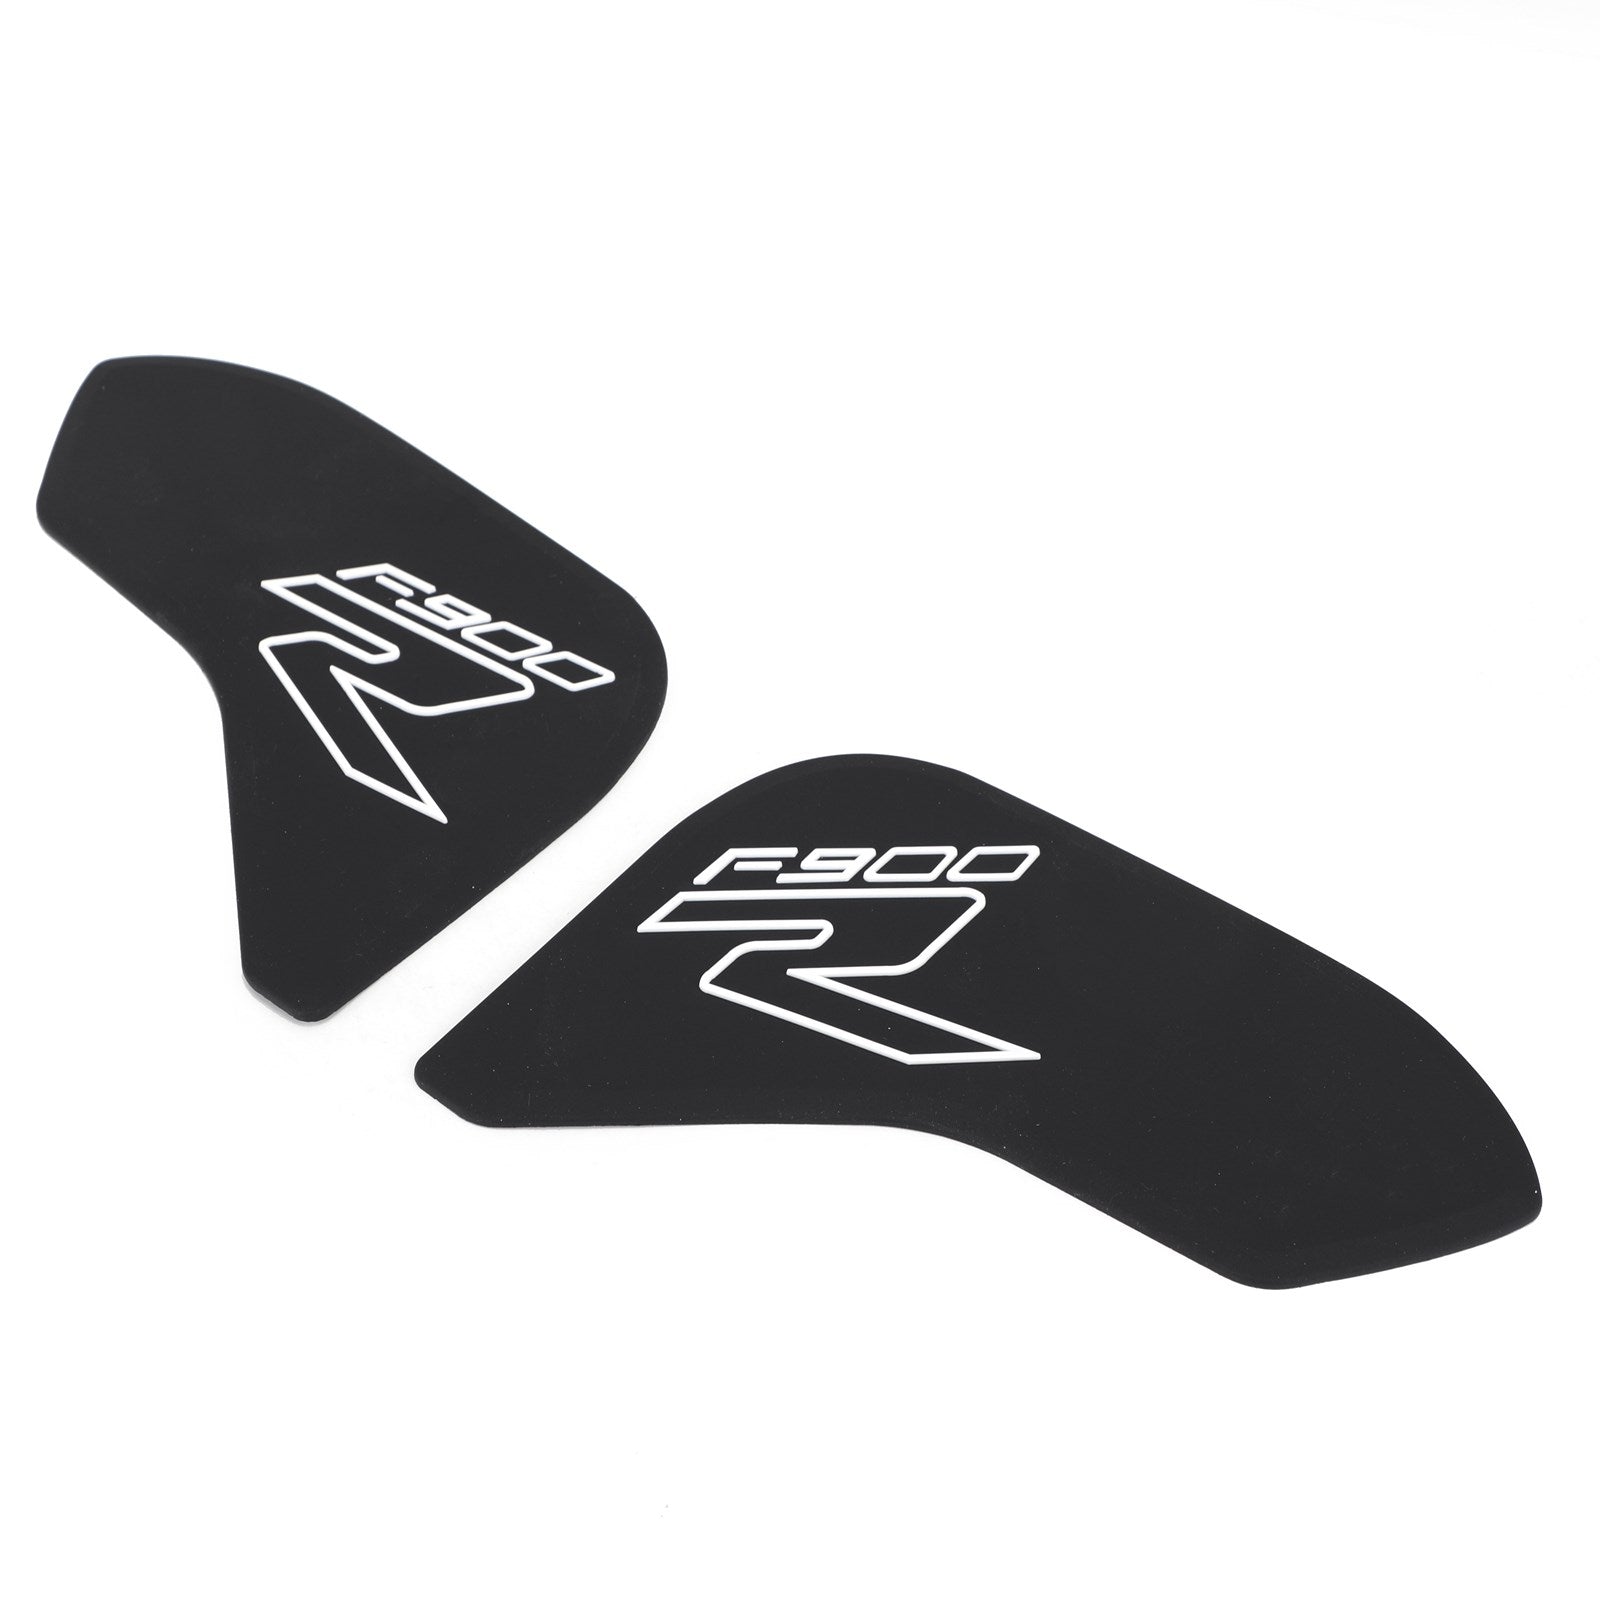 2X Side Tankpad Fuel Tank Protector Fit For Bmw F900R 2020 Made Of Rubber Black